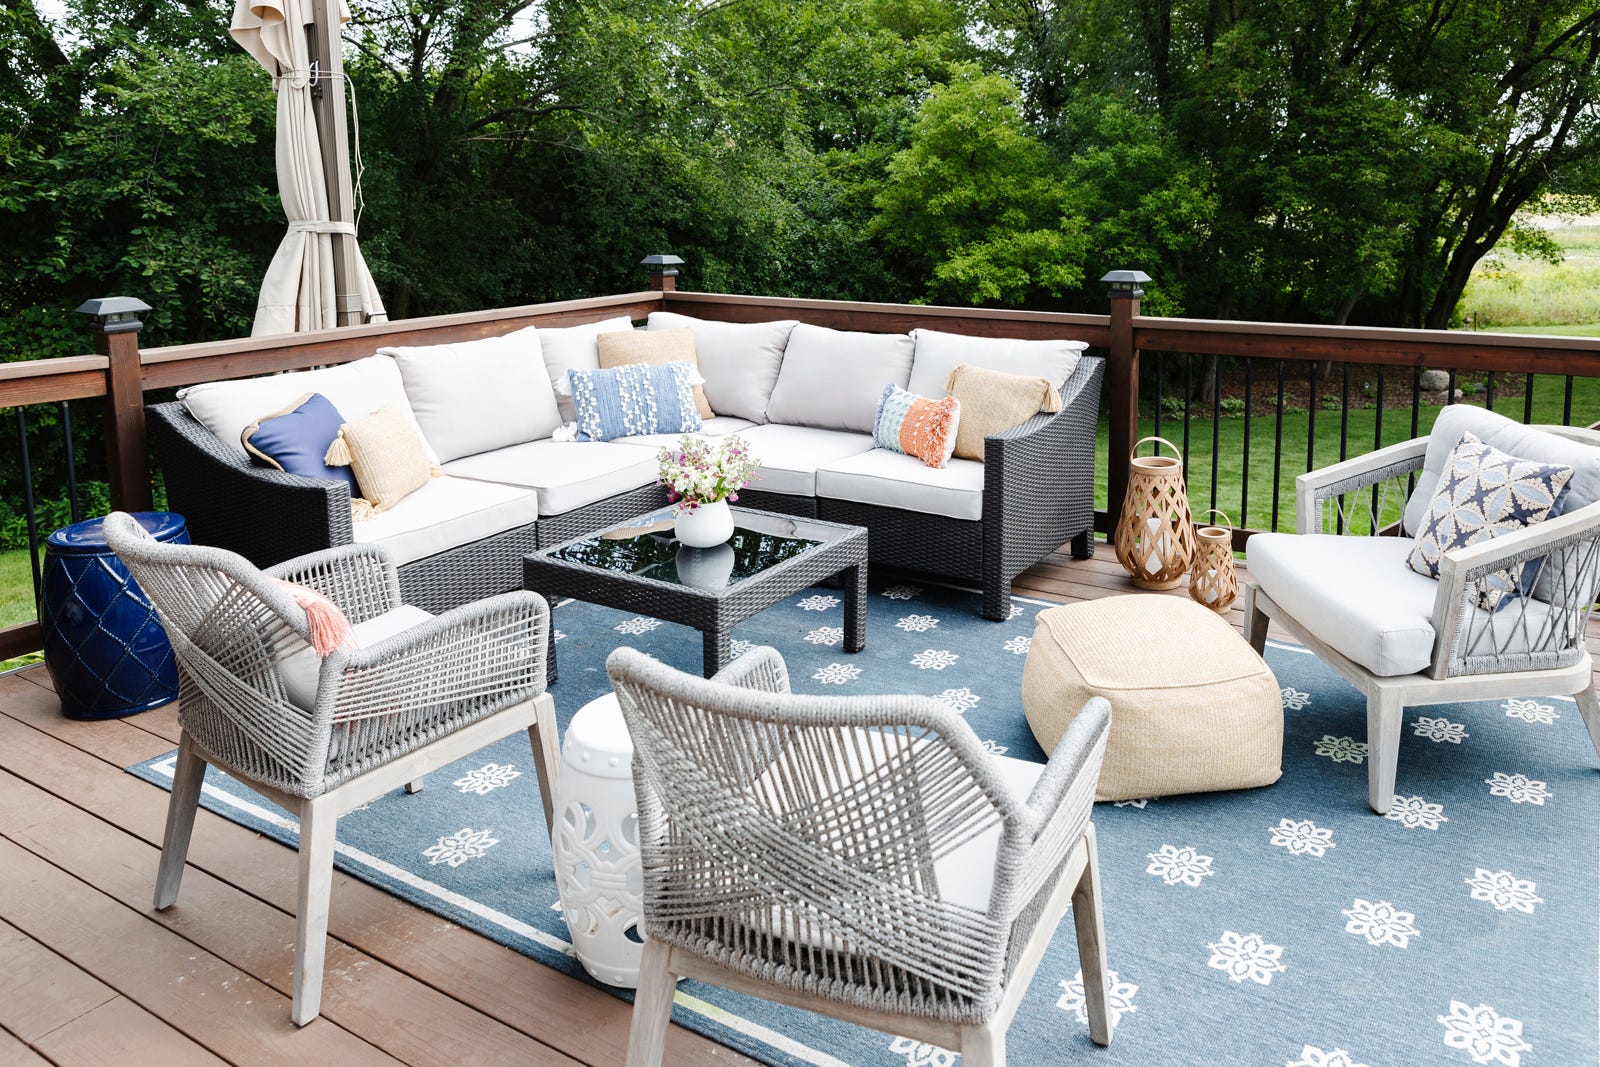 Outdoor Furniture Ideas for Your Deck & Patio